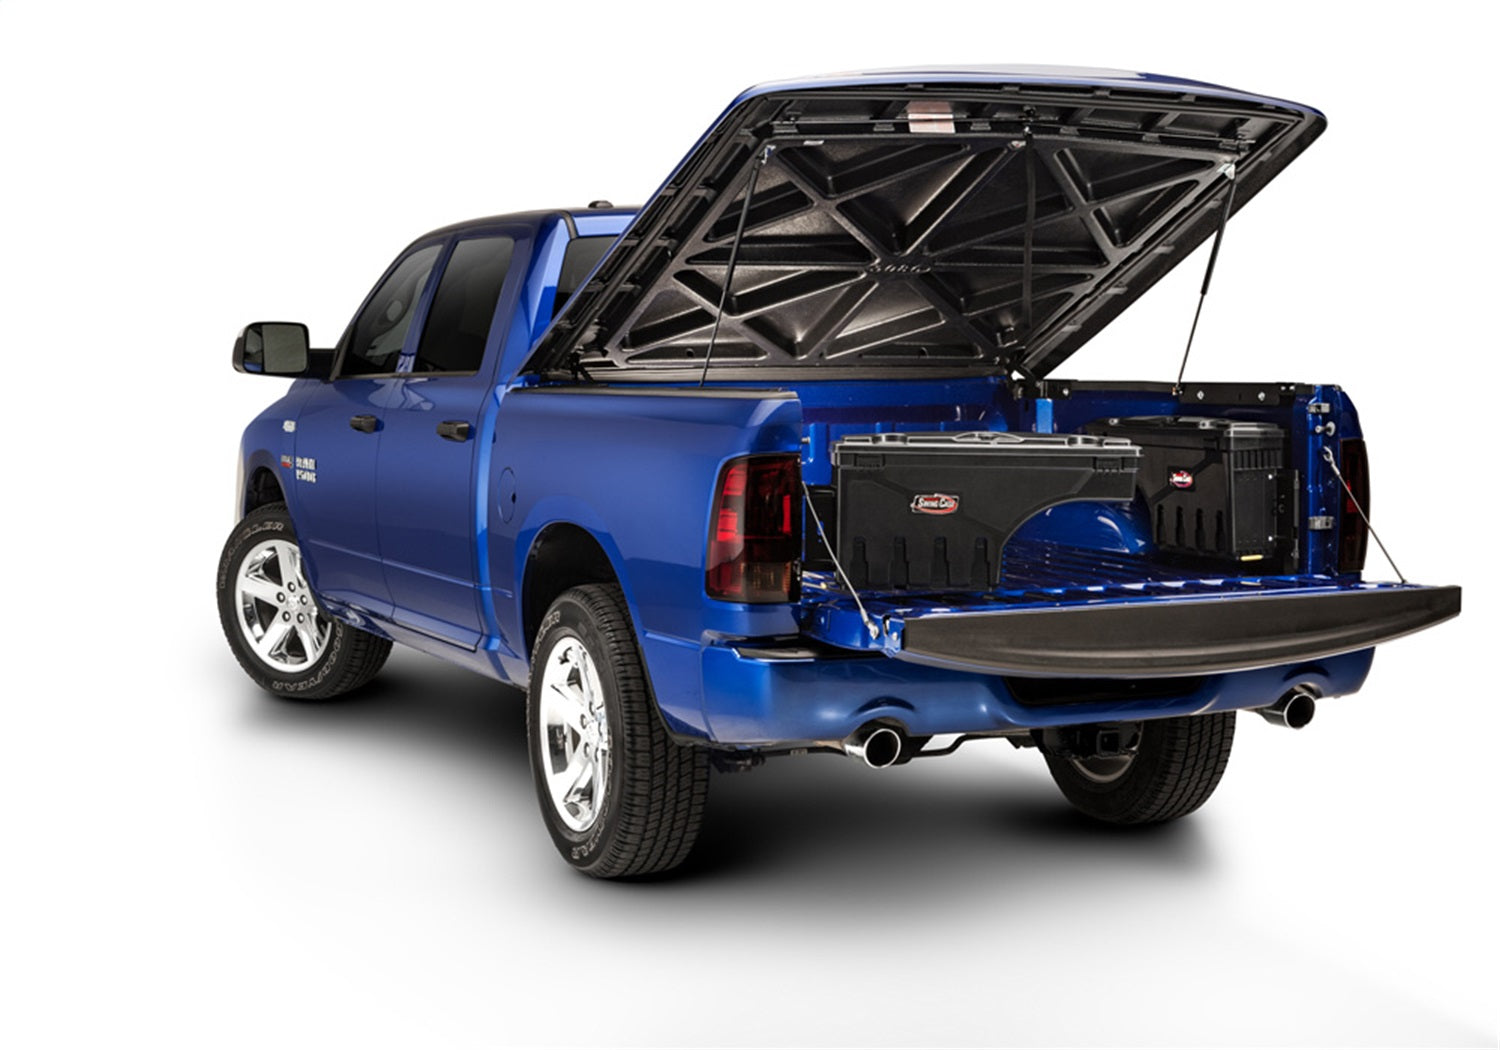 UnderCover SC201D Swing Case Storage Box Fits 97-14 F-150 F-150 Heritage